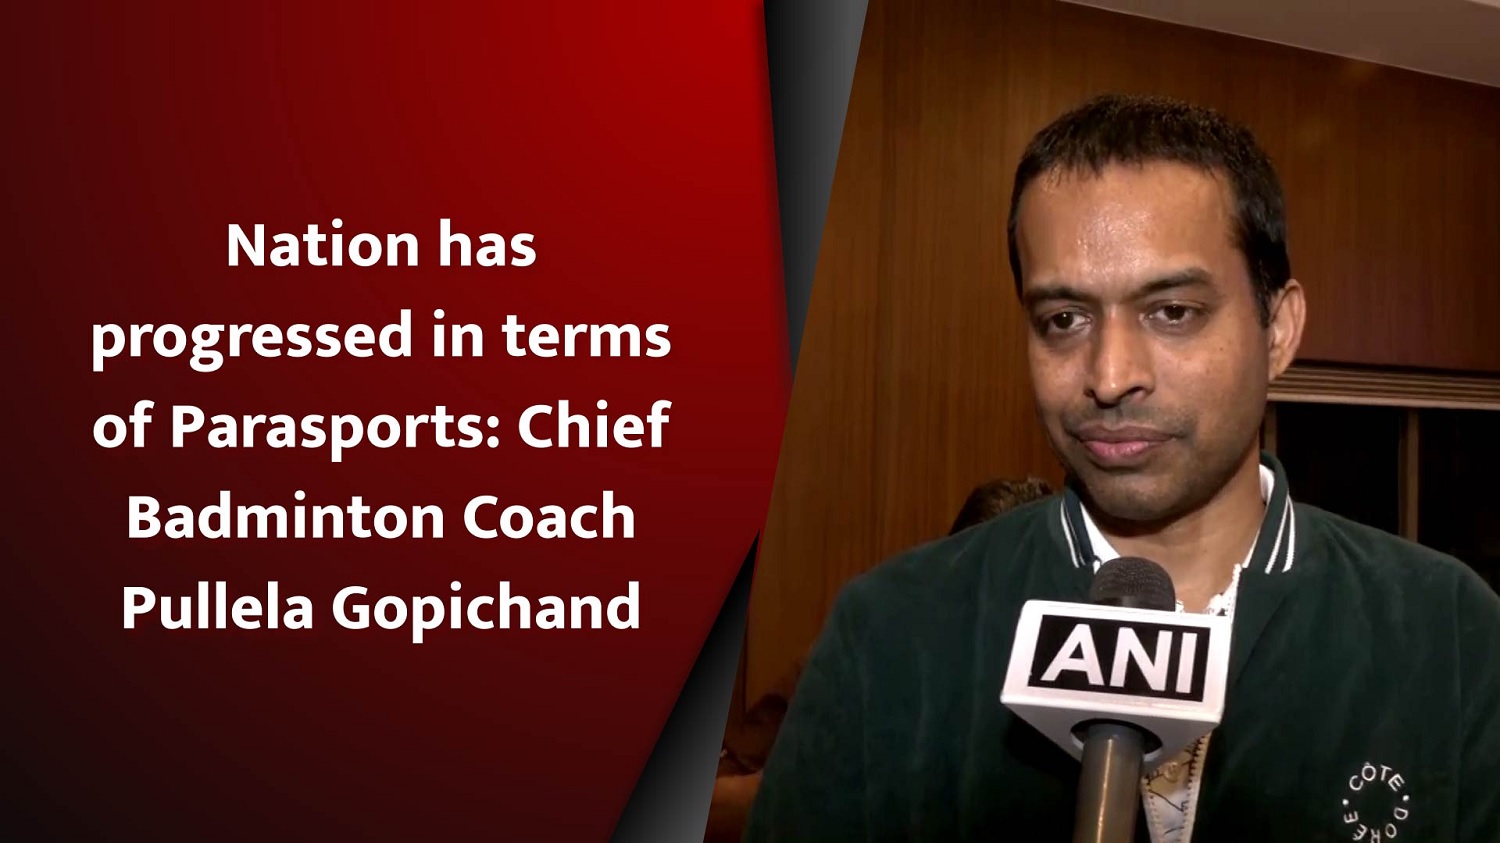 Nation has progressed in terms of Parasports` Chief Badminton Coach Pullela Gopichand